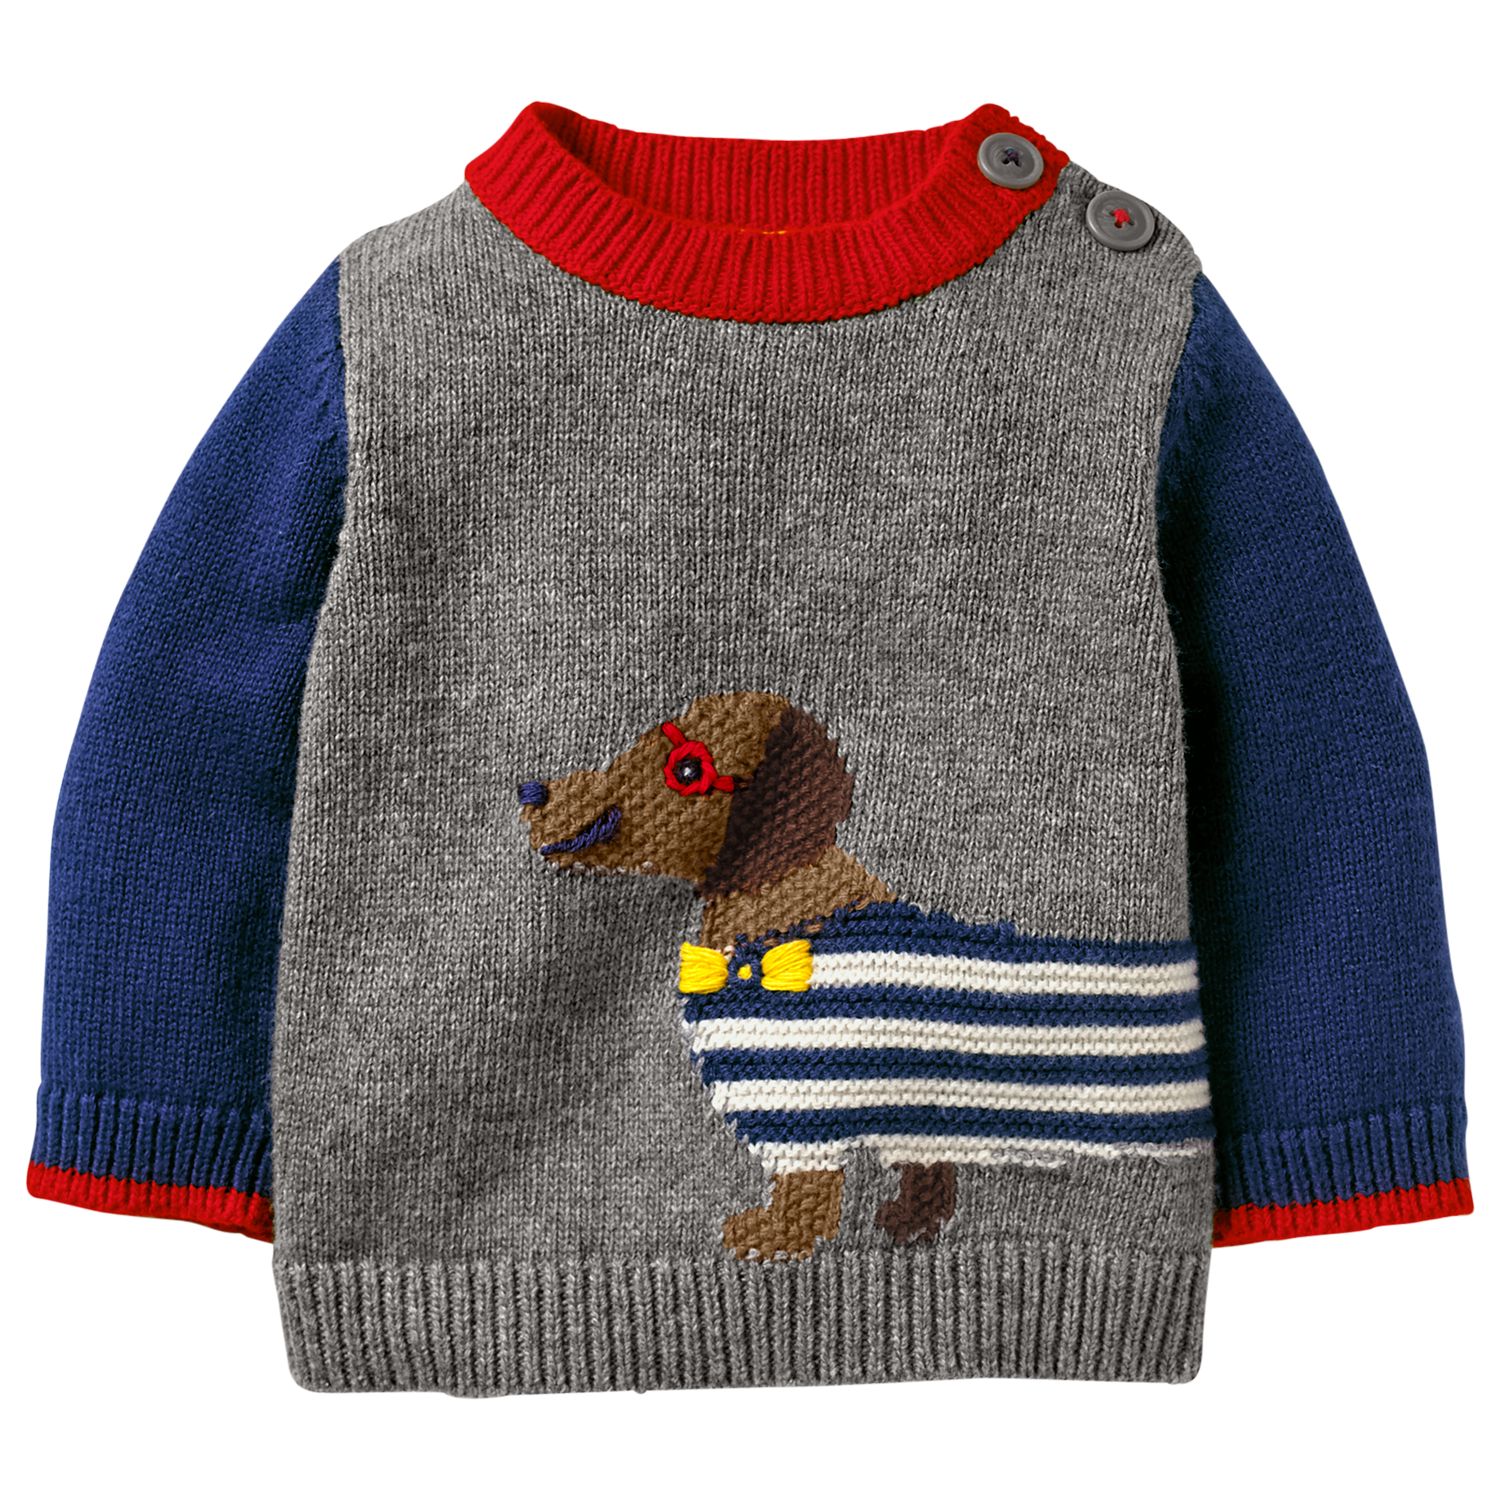 Mini Boden Baby Fun Knitted Jumper, Grey Marl at John Lewis & Partners